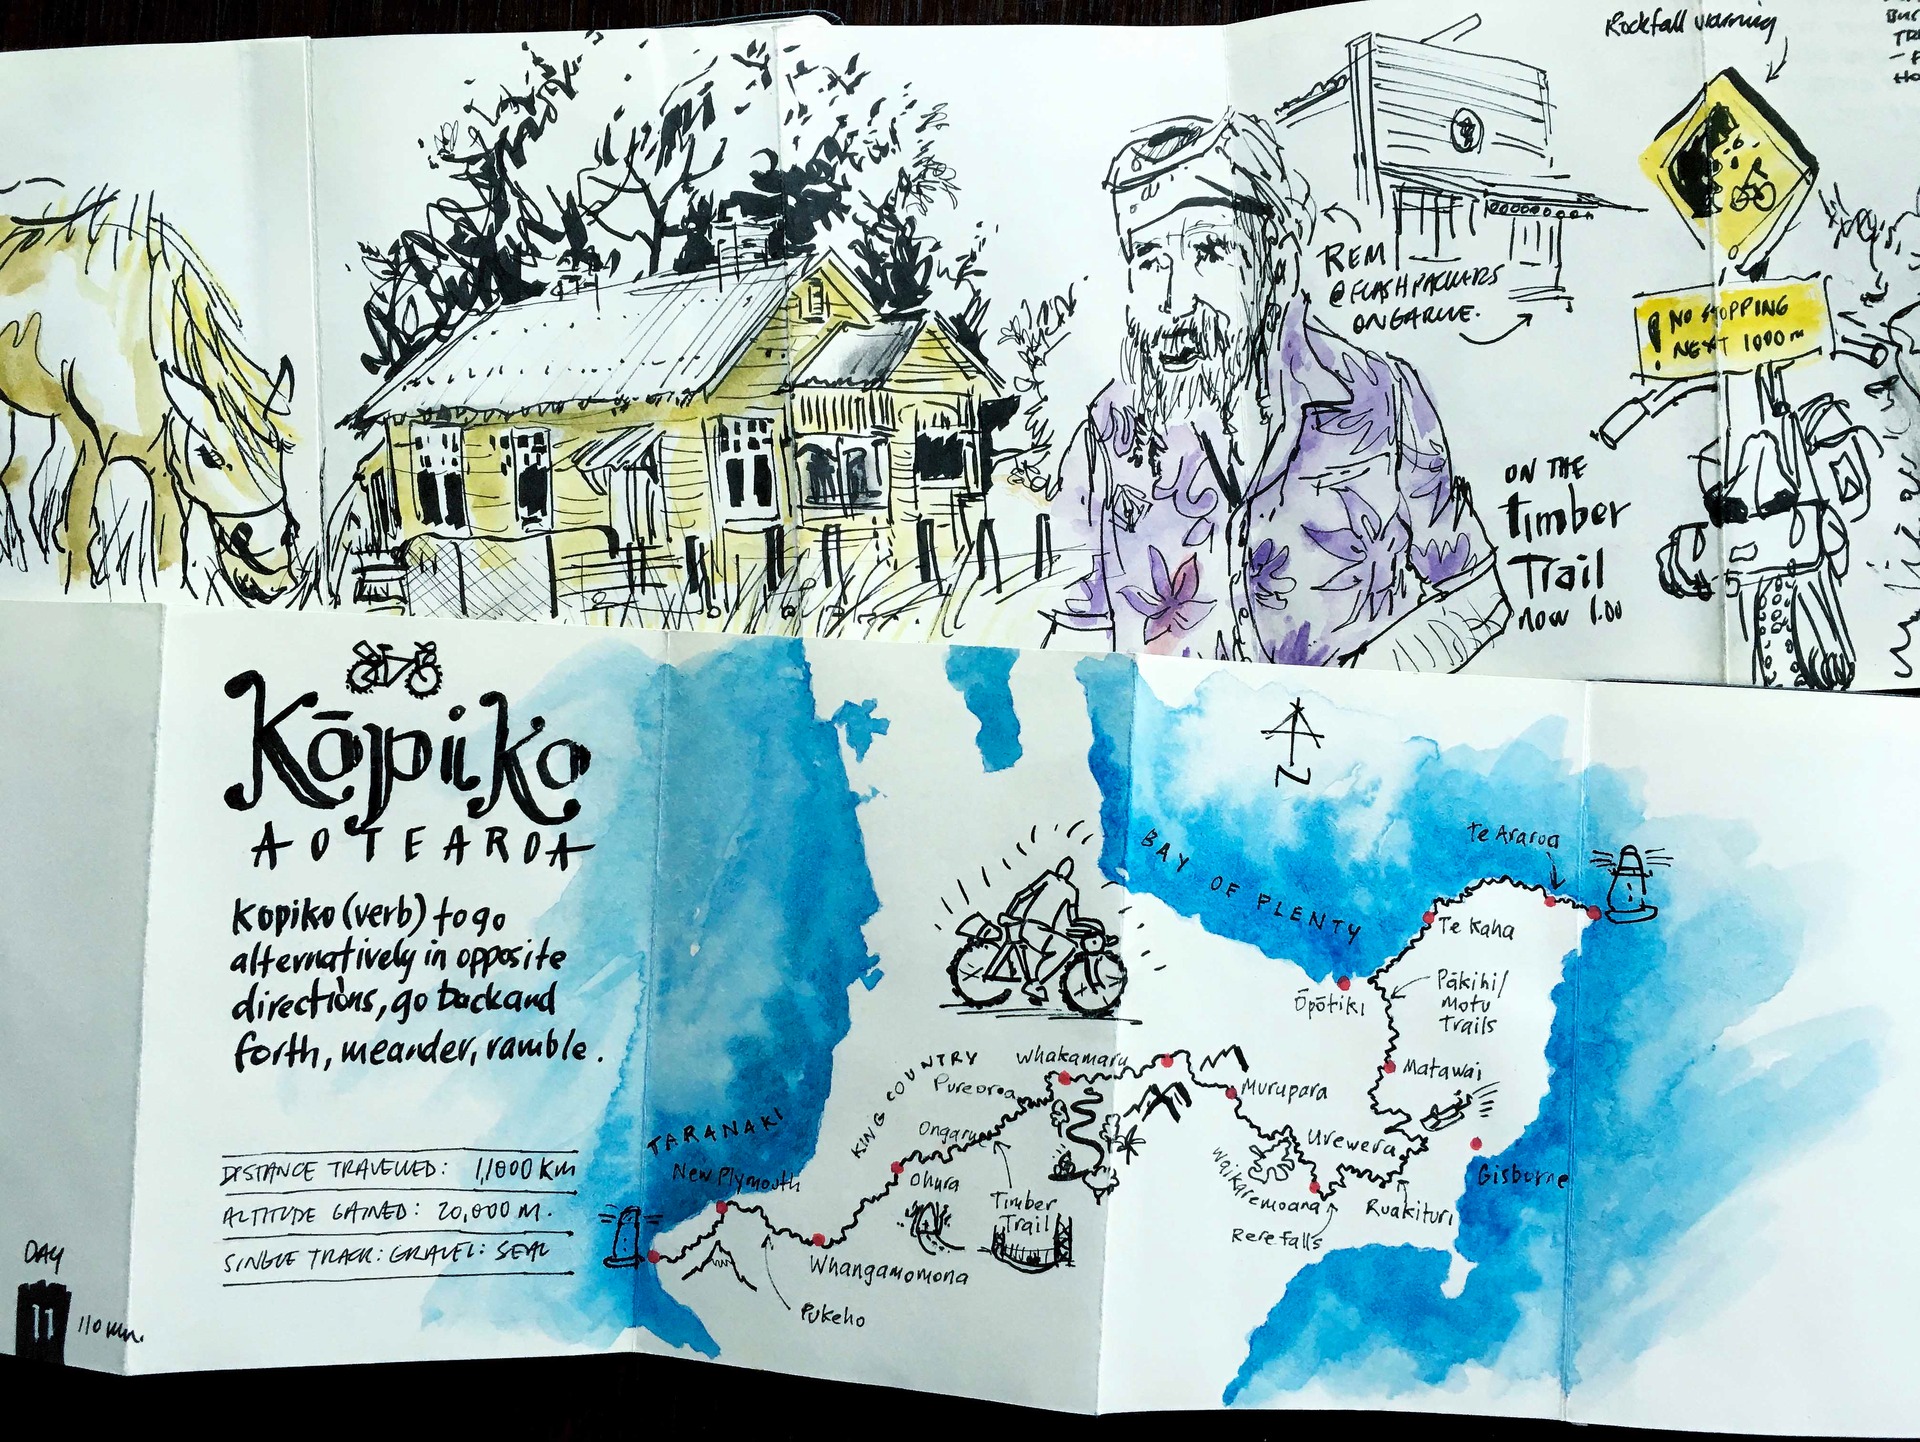 GO NZ Cycling Kōpiko Aotearoa - Cape Egmont to East Cape sketches from the saddle